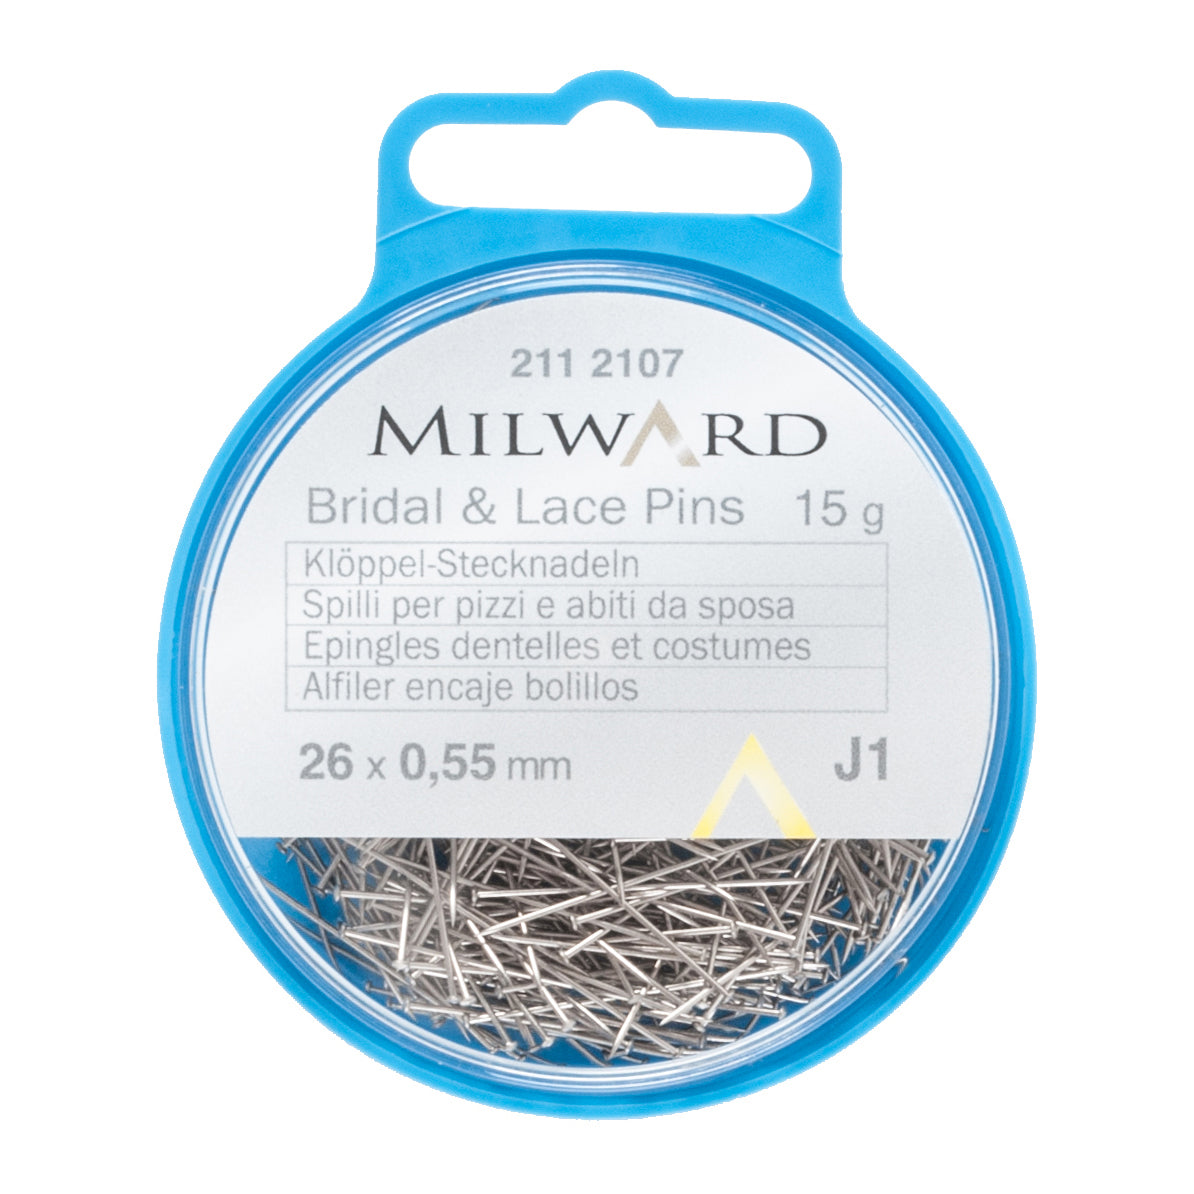 Milward Bridalwear and Lace Pins | 15g pack from Jaycotts Sewing Supplies